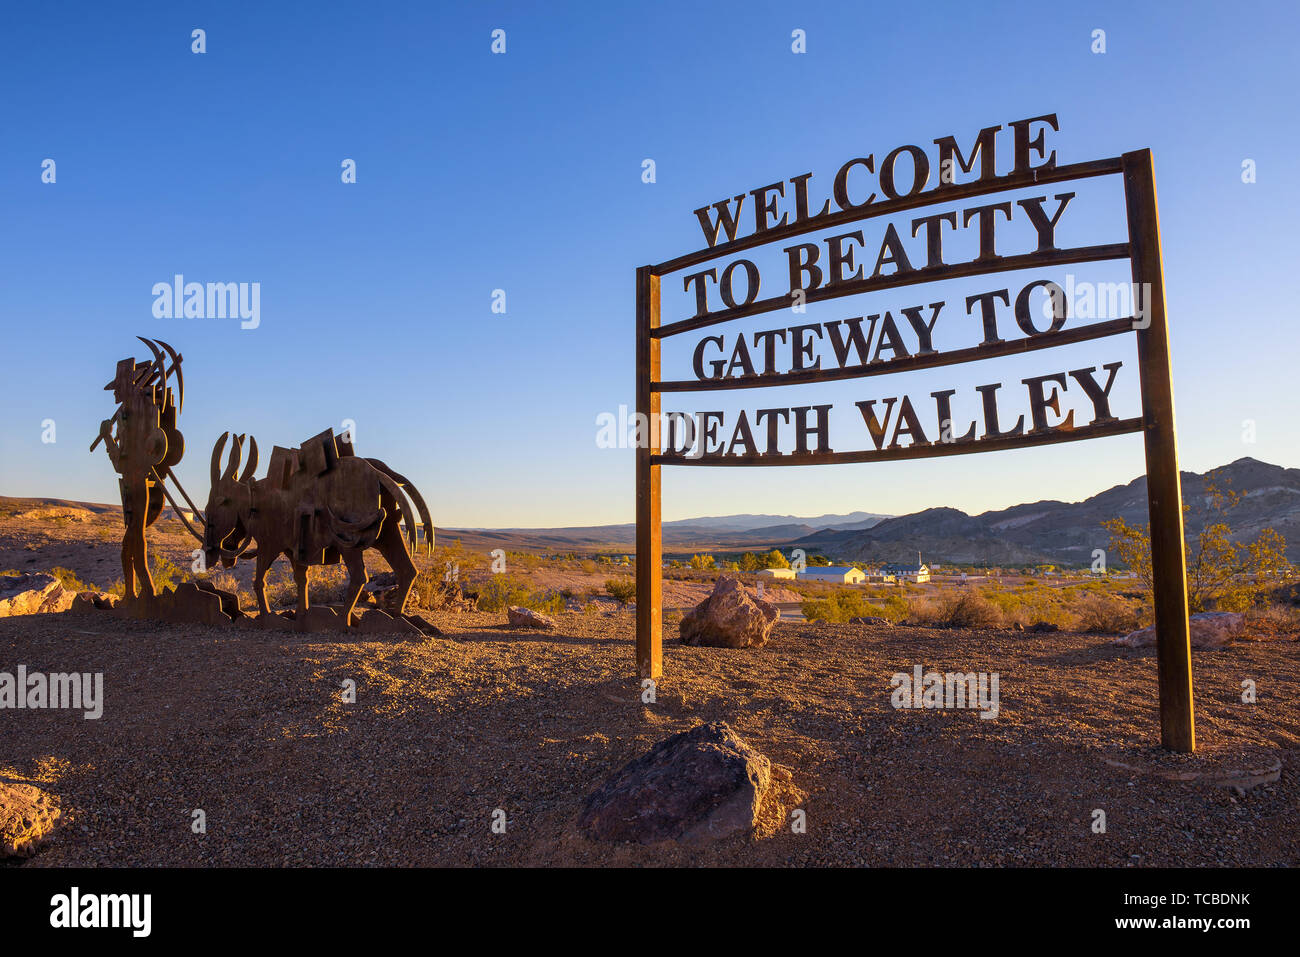 Welcome sign to Beatty located on the road connecting Beatty to Death Valley Stock Photo